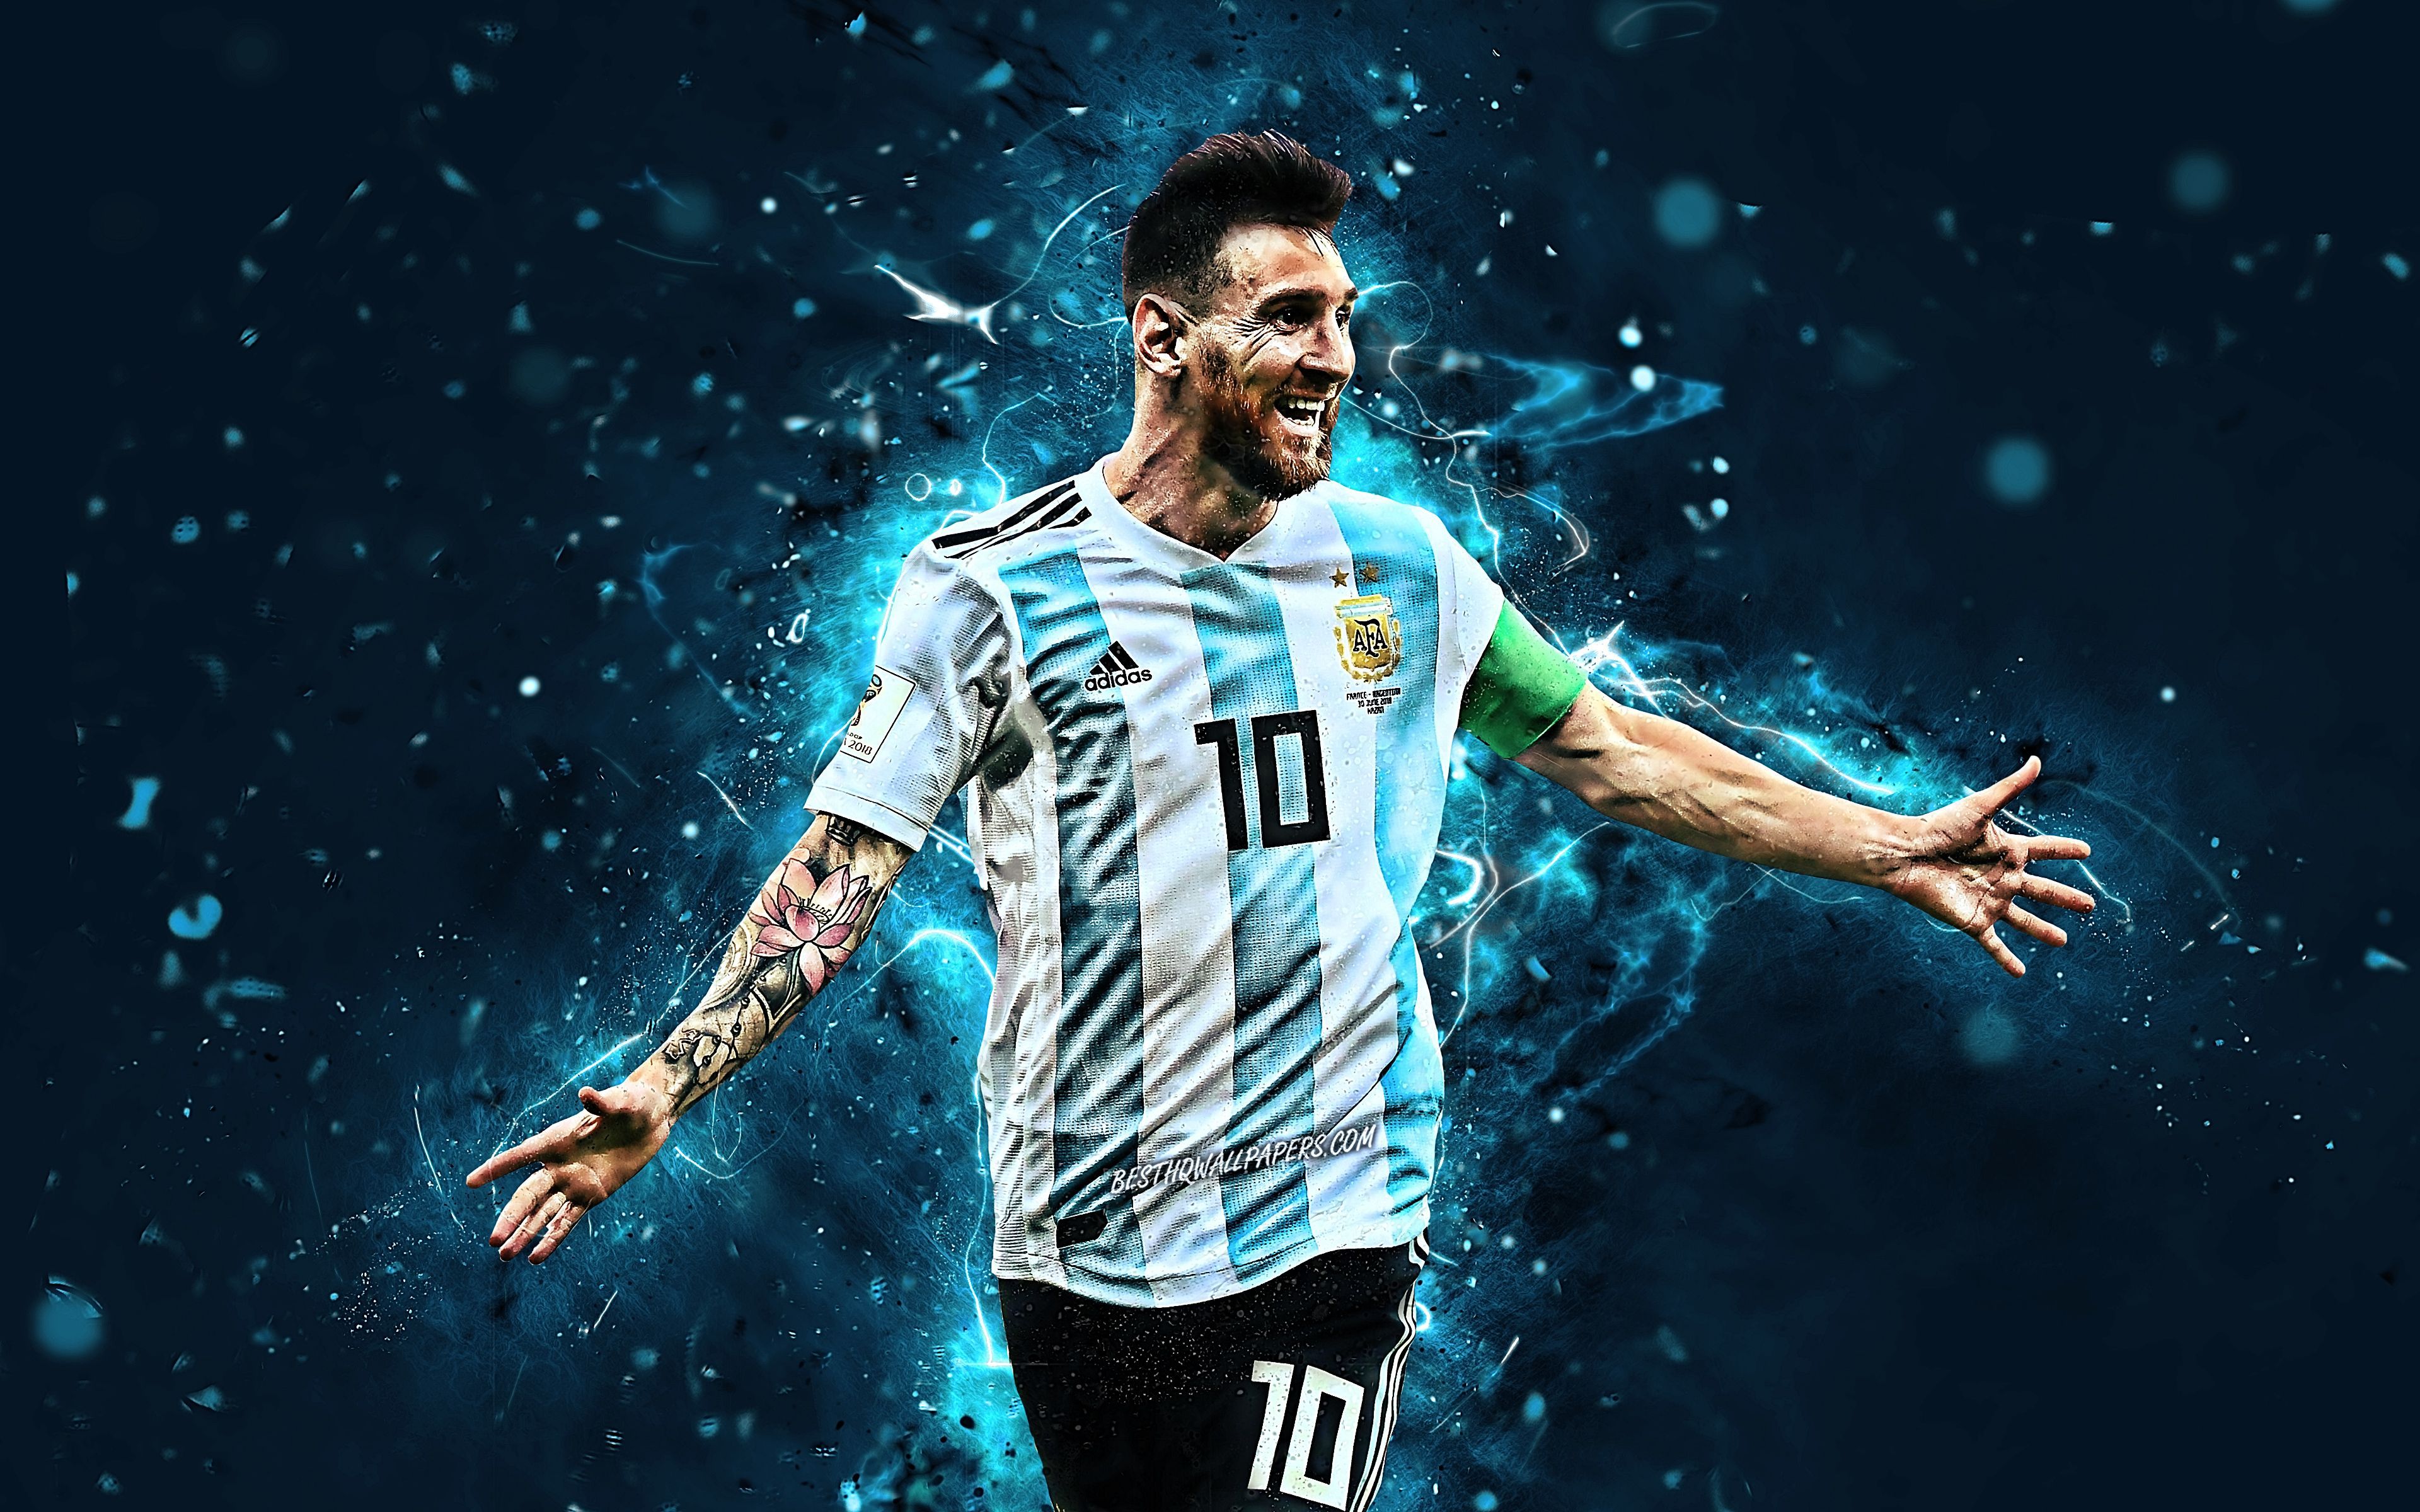 Download Caption: Messi Triumphantly in PSG Jersey Wallpaper | Wallpapers .com